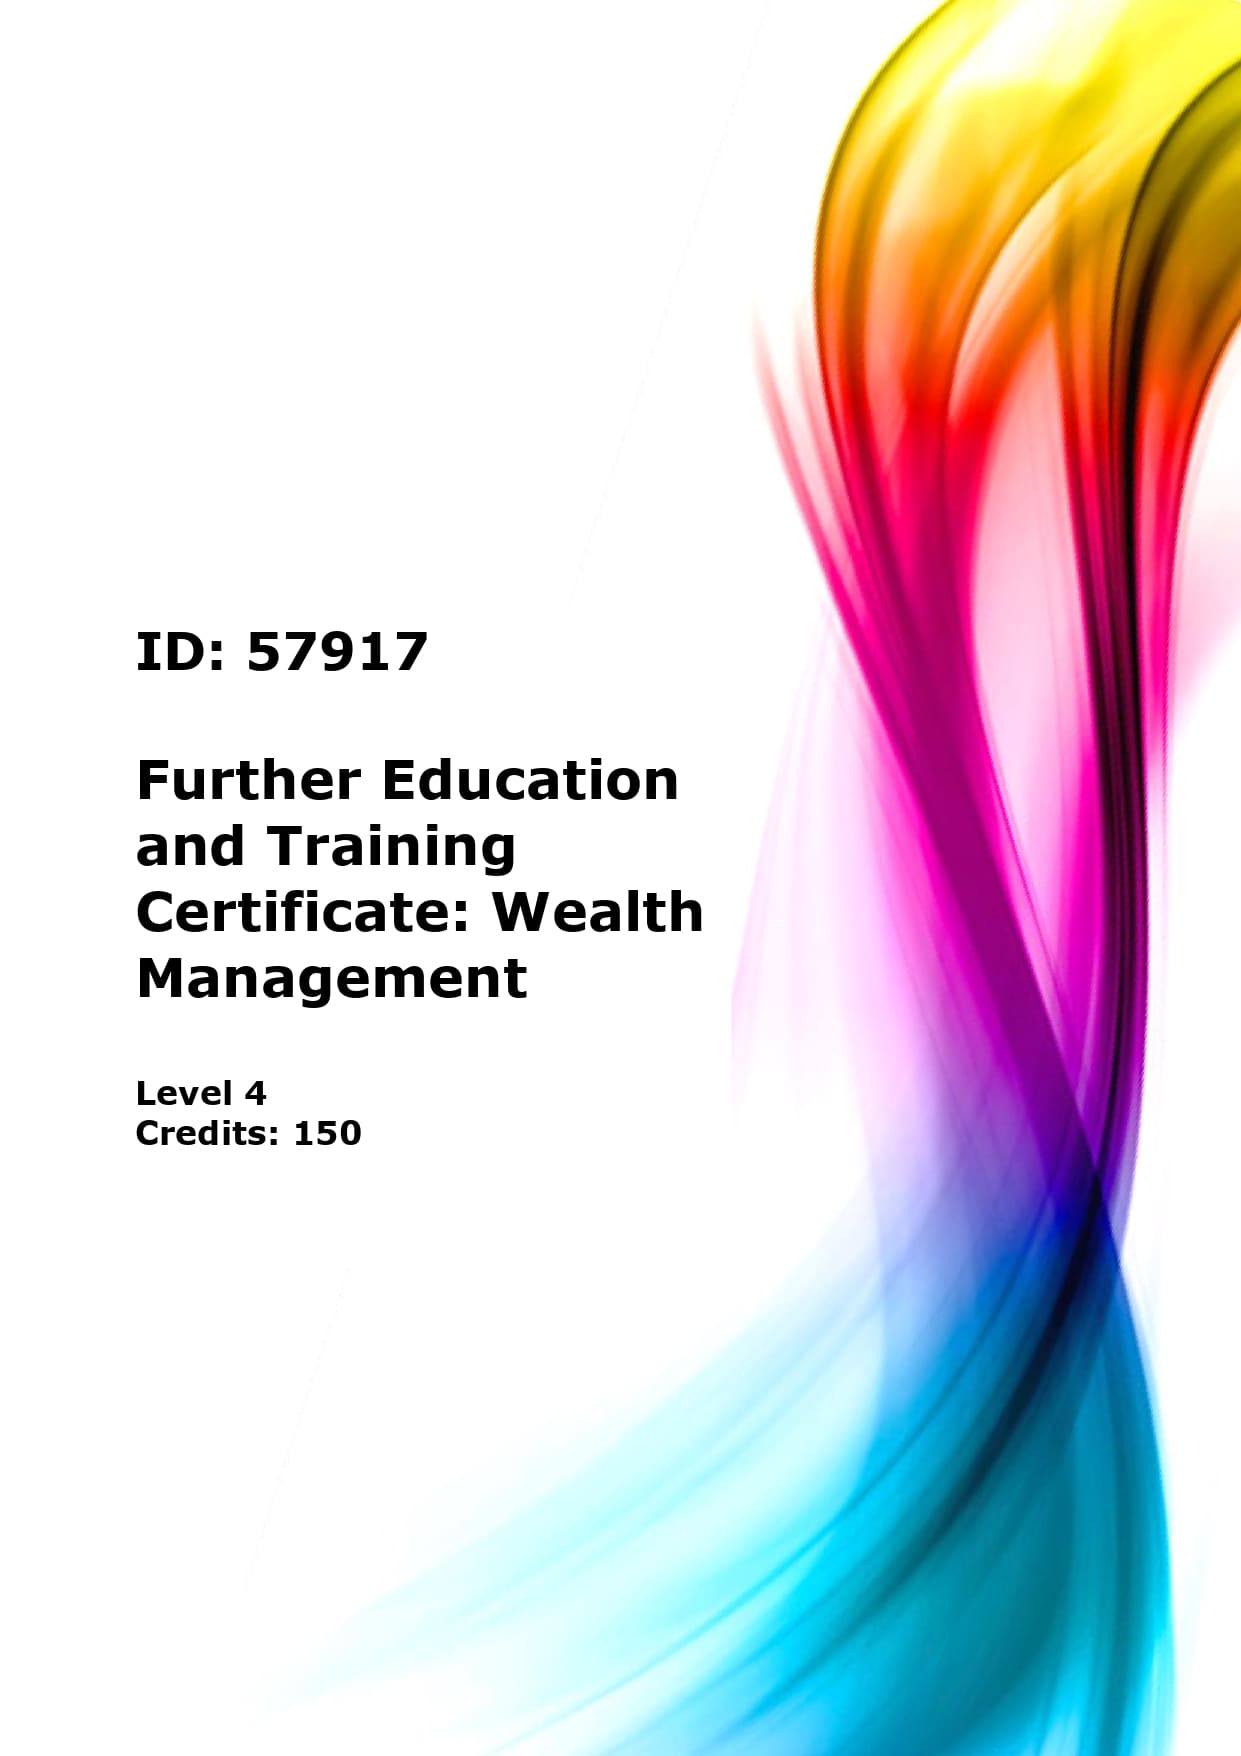 Further Education and Training Certificate: Wealth Management